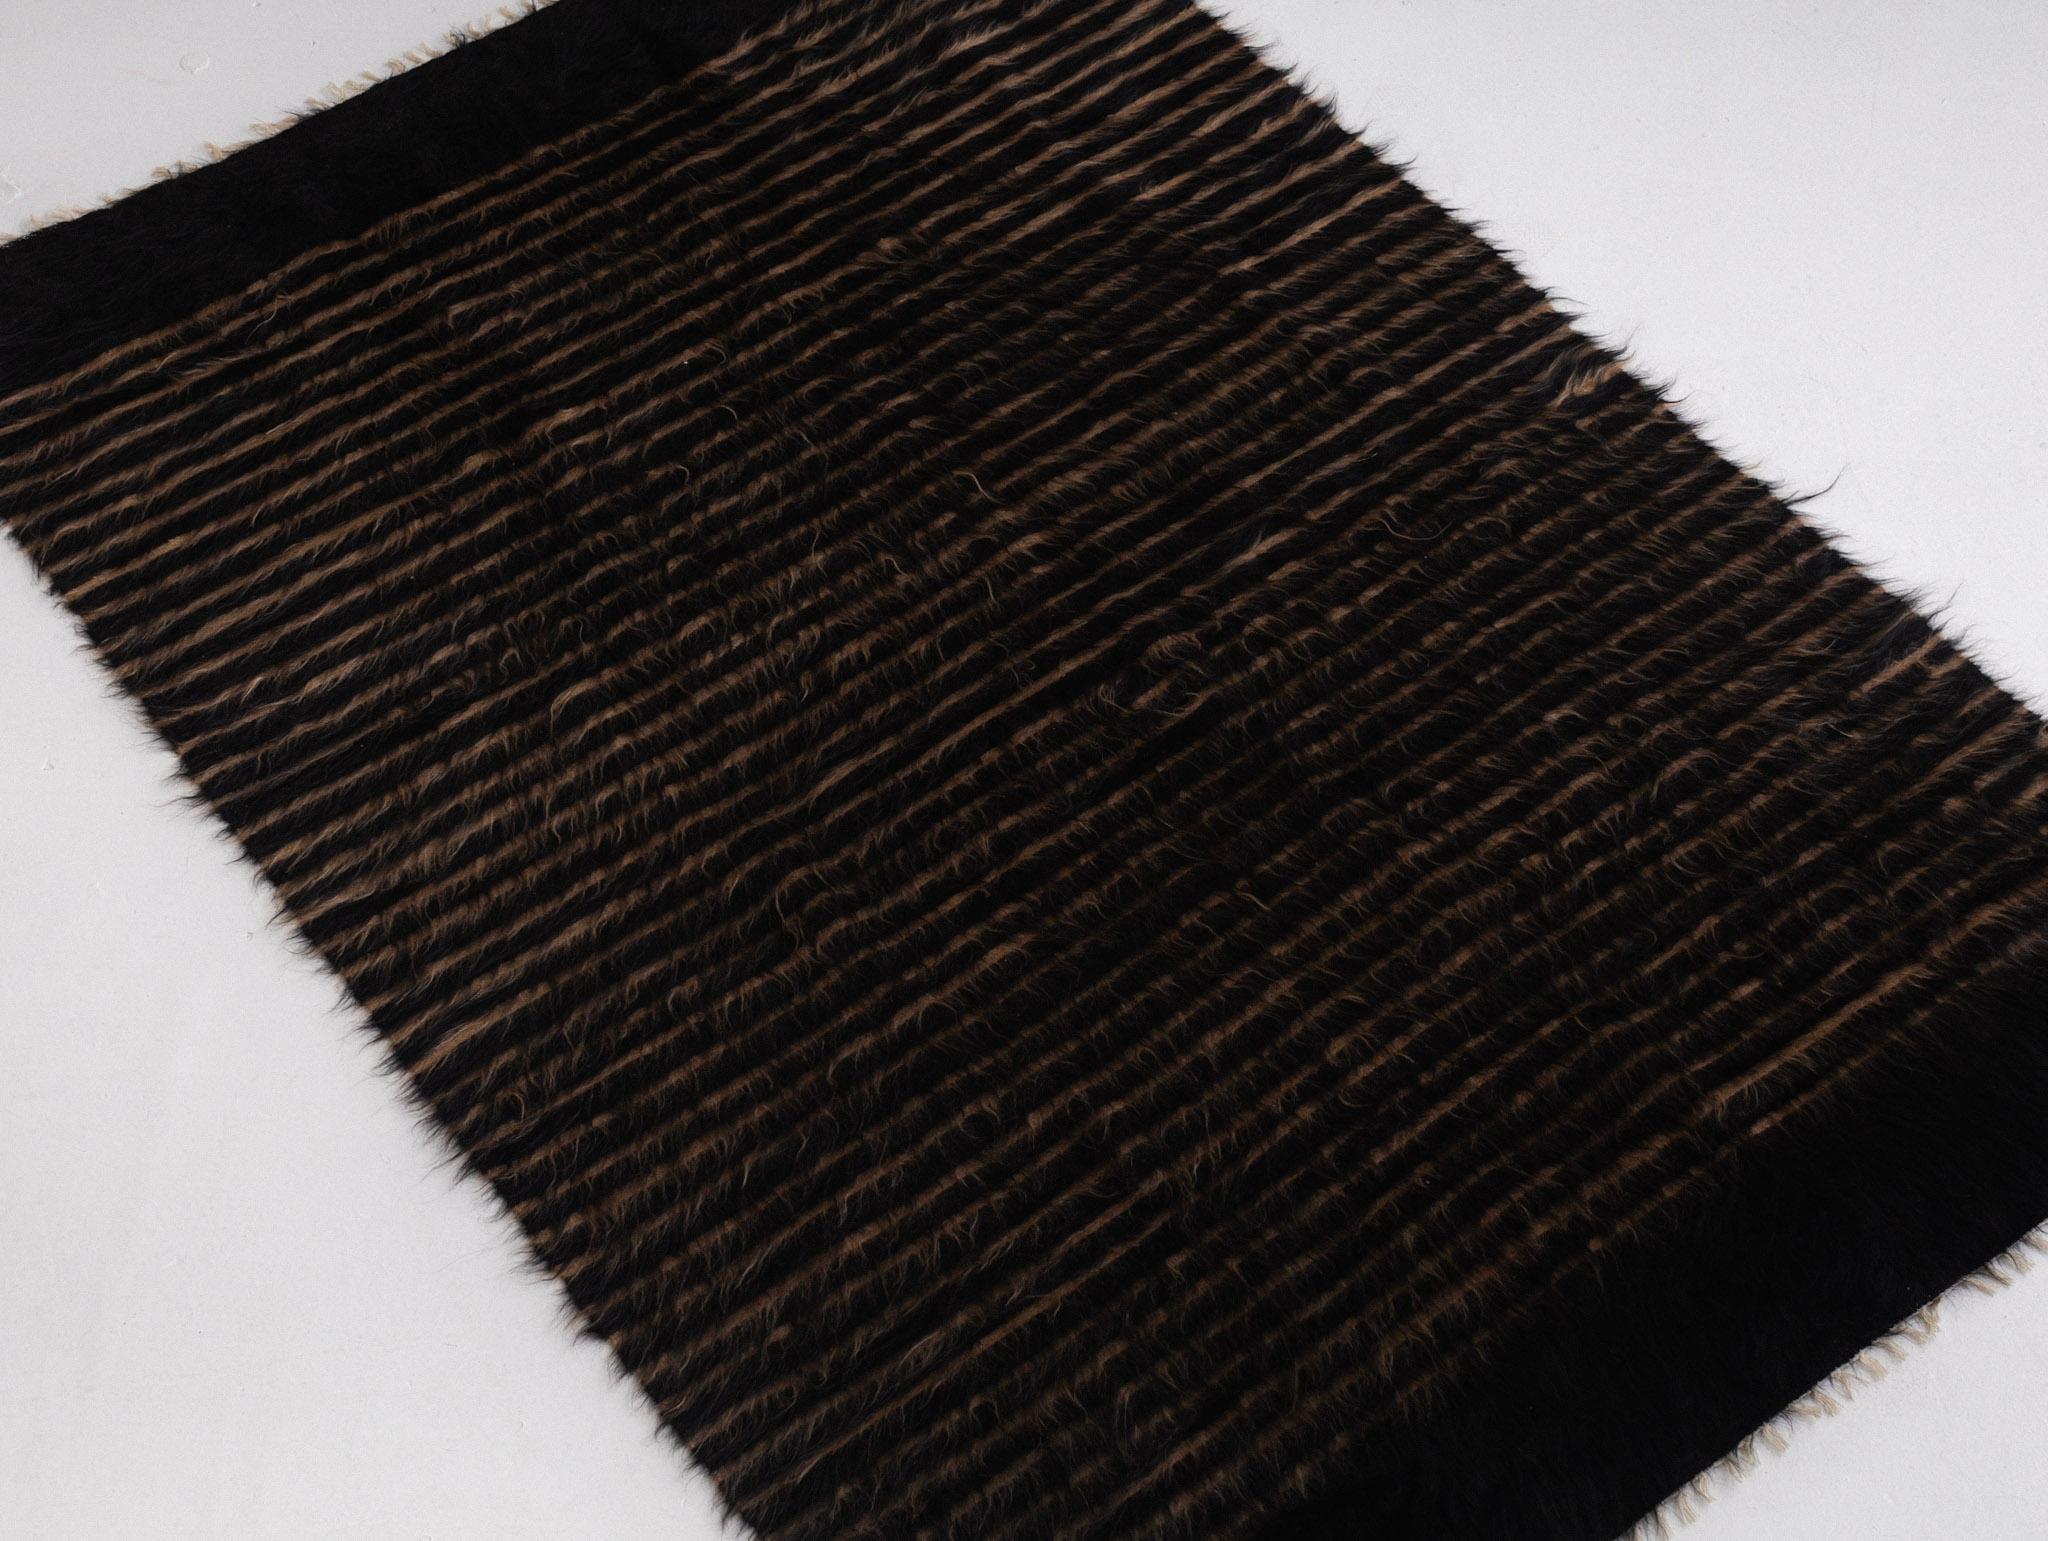 A hand woven Turkish “Siirt” blanket. Made with without dyes from natural color mohair goat wool. A thin flat weave with long shaggy fibers give this weaving its unique fuzzy appearance.